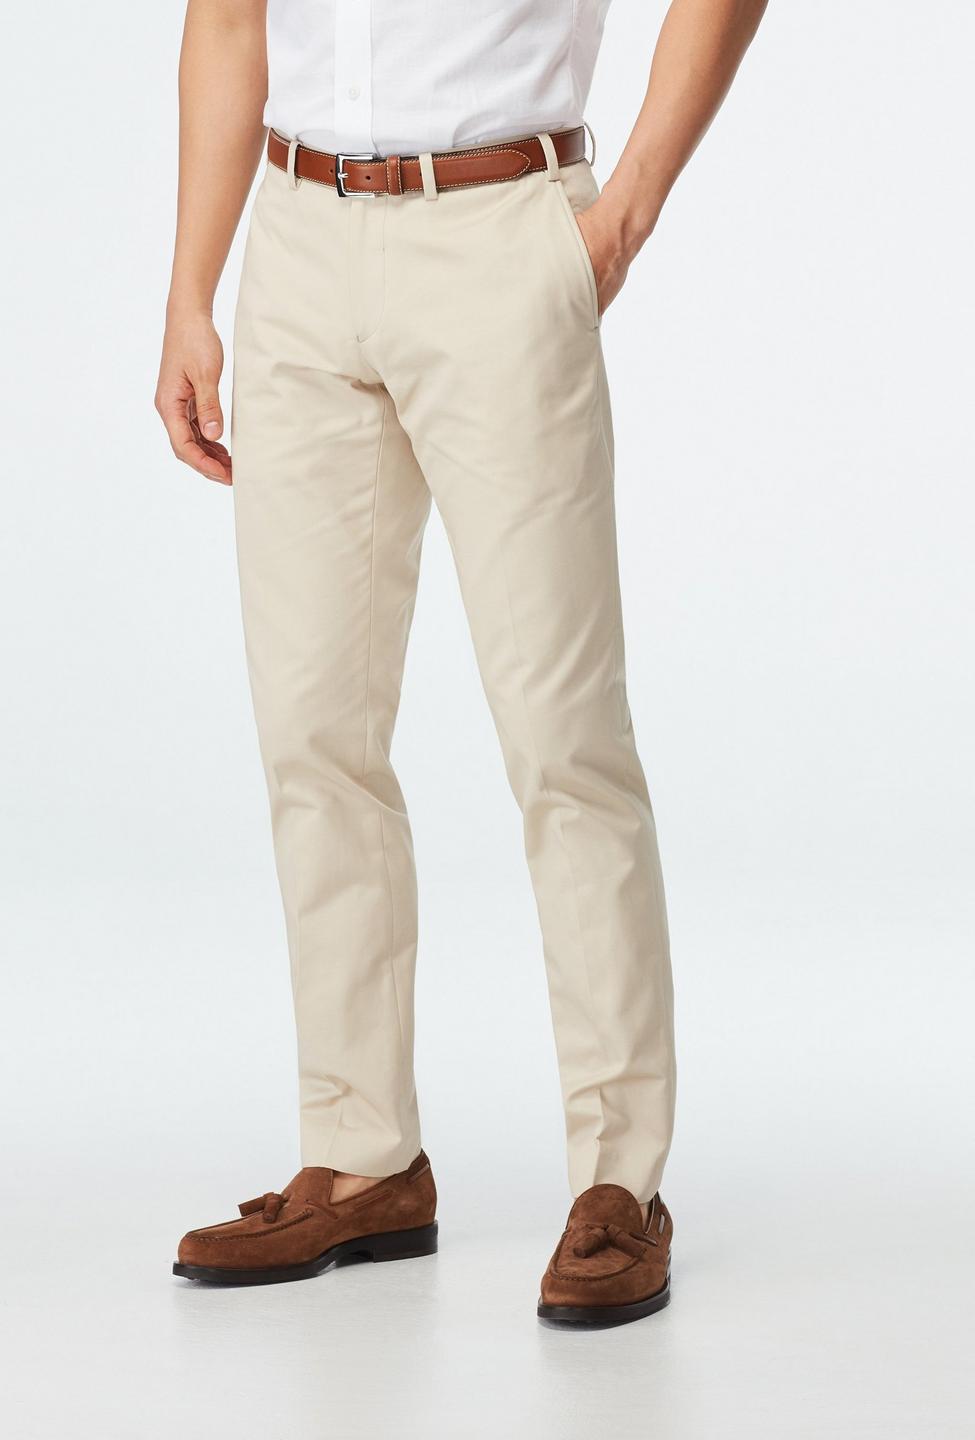 Brown pants - Halton Solid Design from Premium Indochino Collection